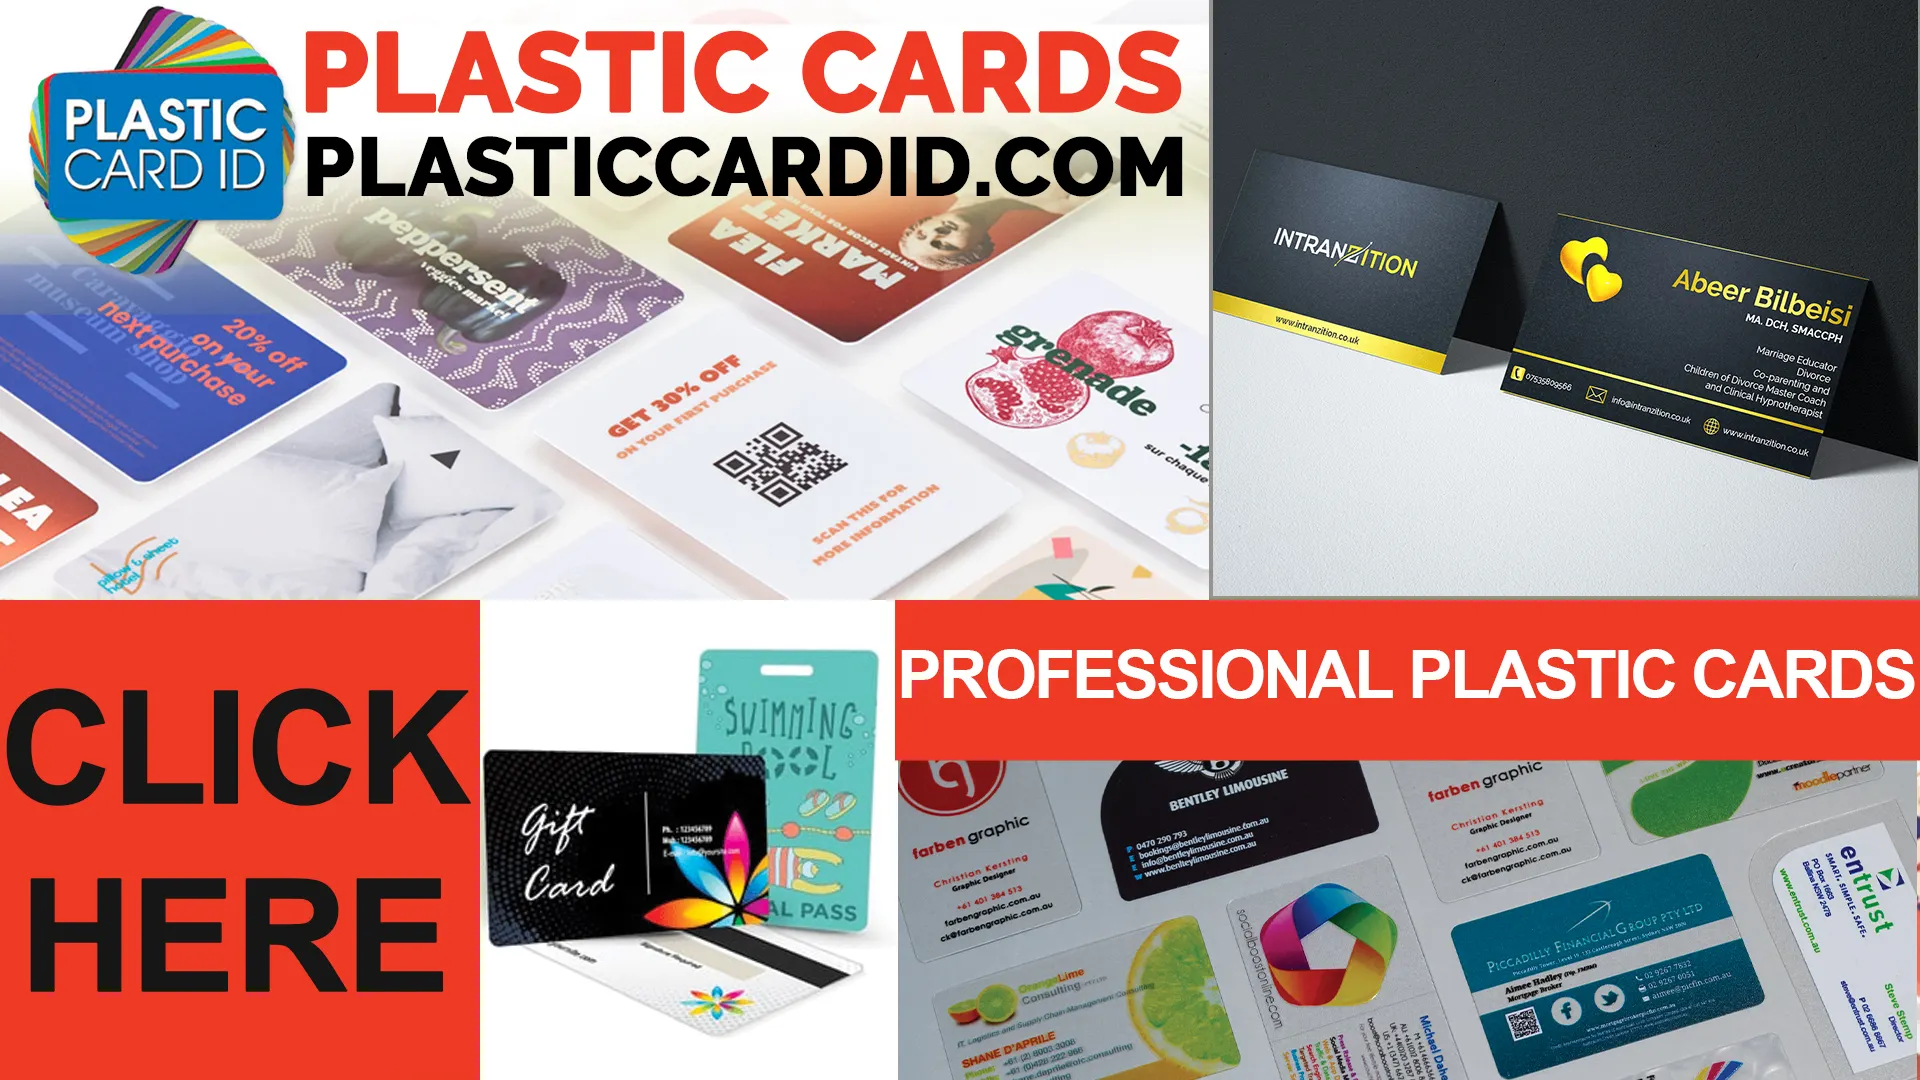 Captivating Your Audience with Intuitive Card Design